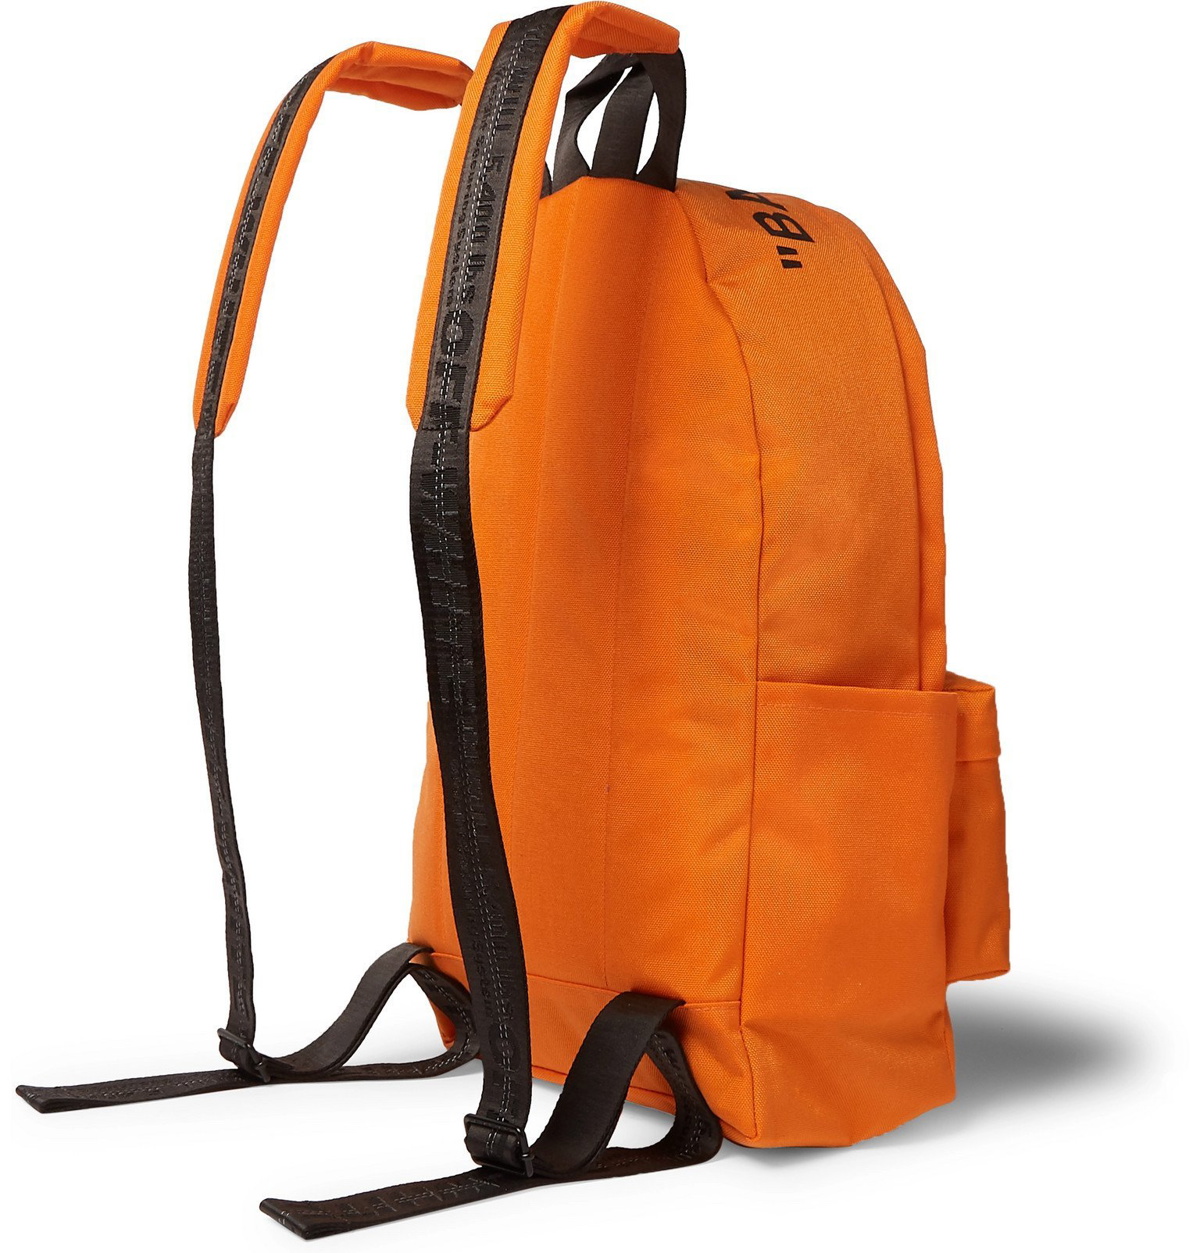 Off-White - Printed Canvas Backpack - Orange Off-White